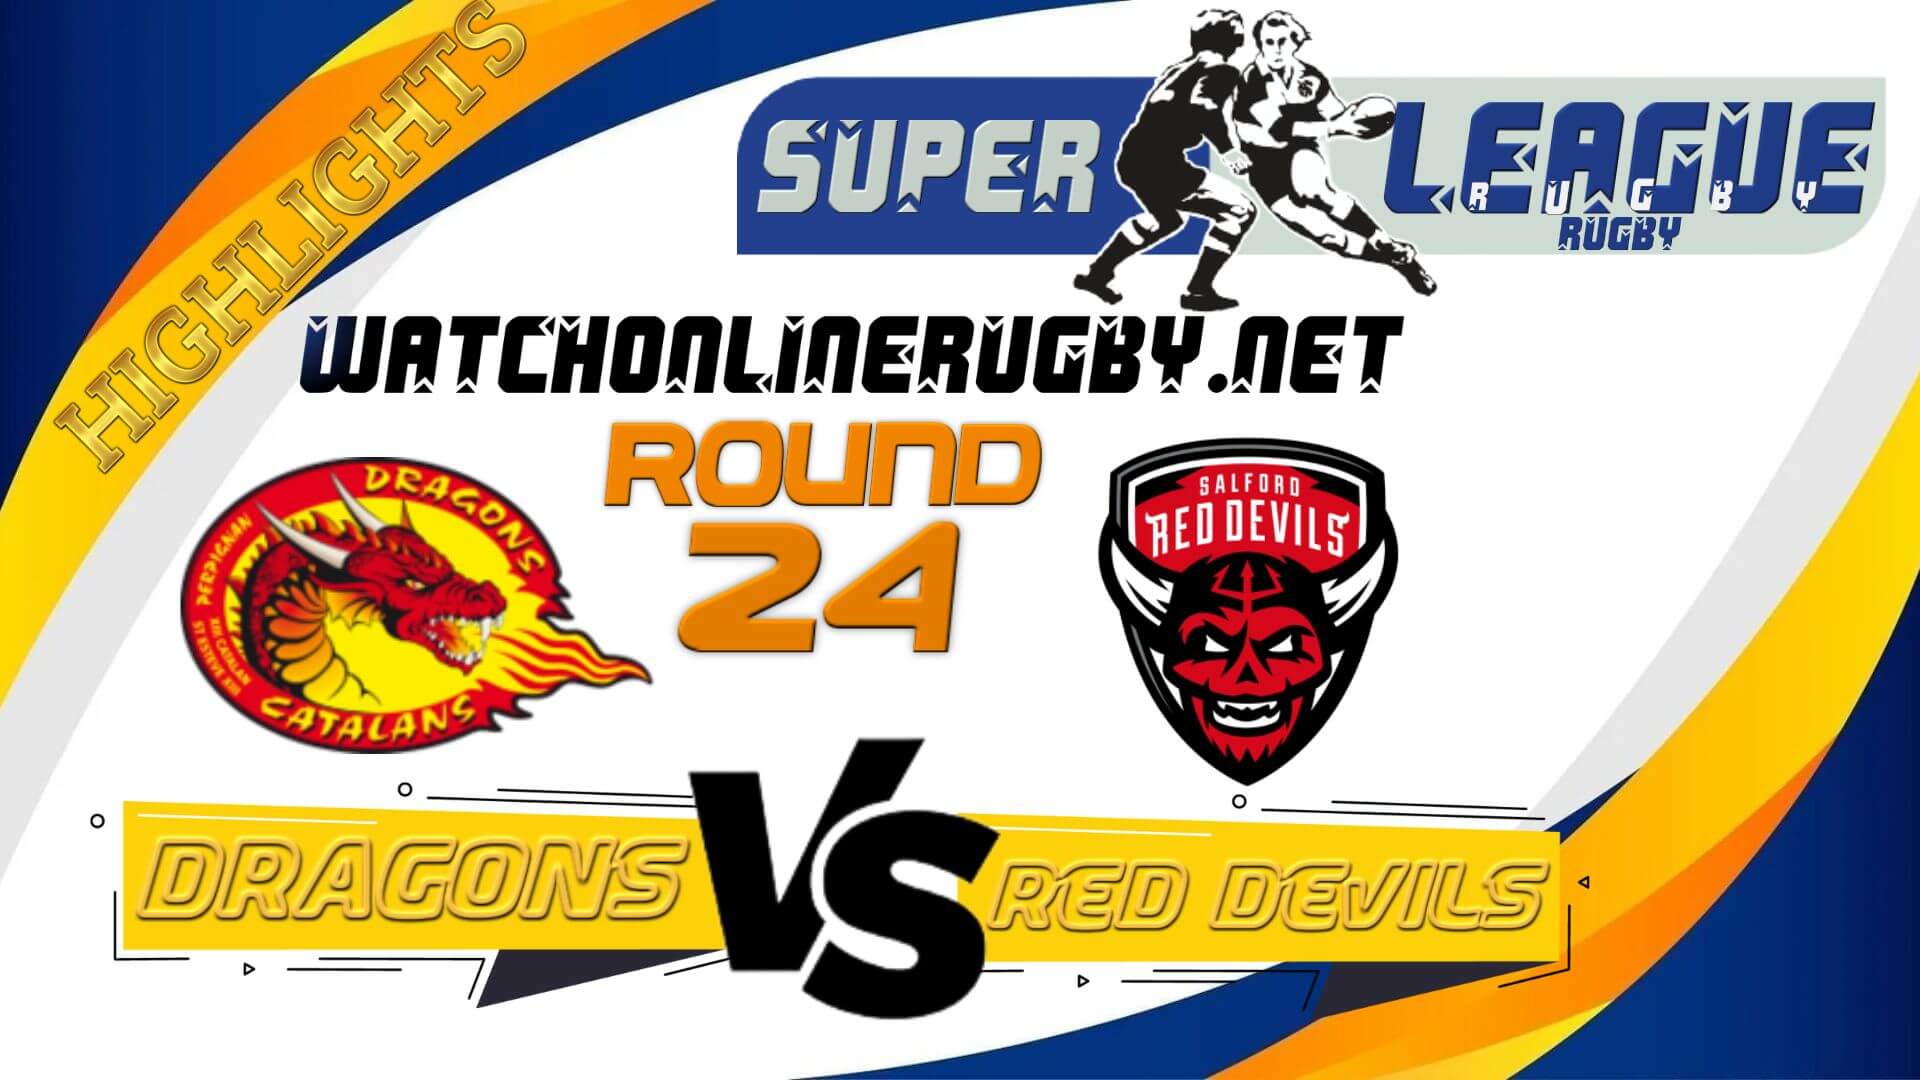 Catalans Dragons Vs Salford Red Devils Super League Rugby 2022 RD 24